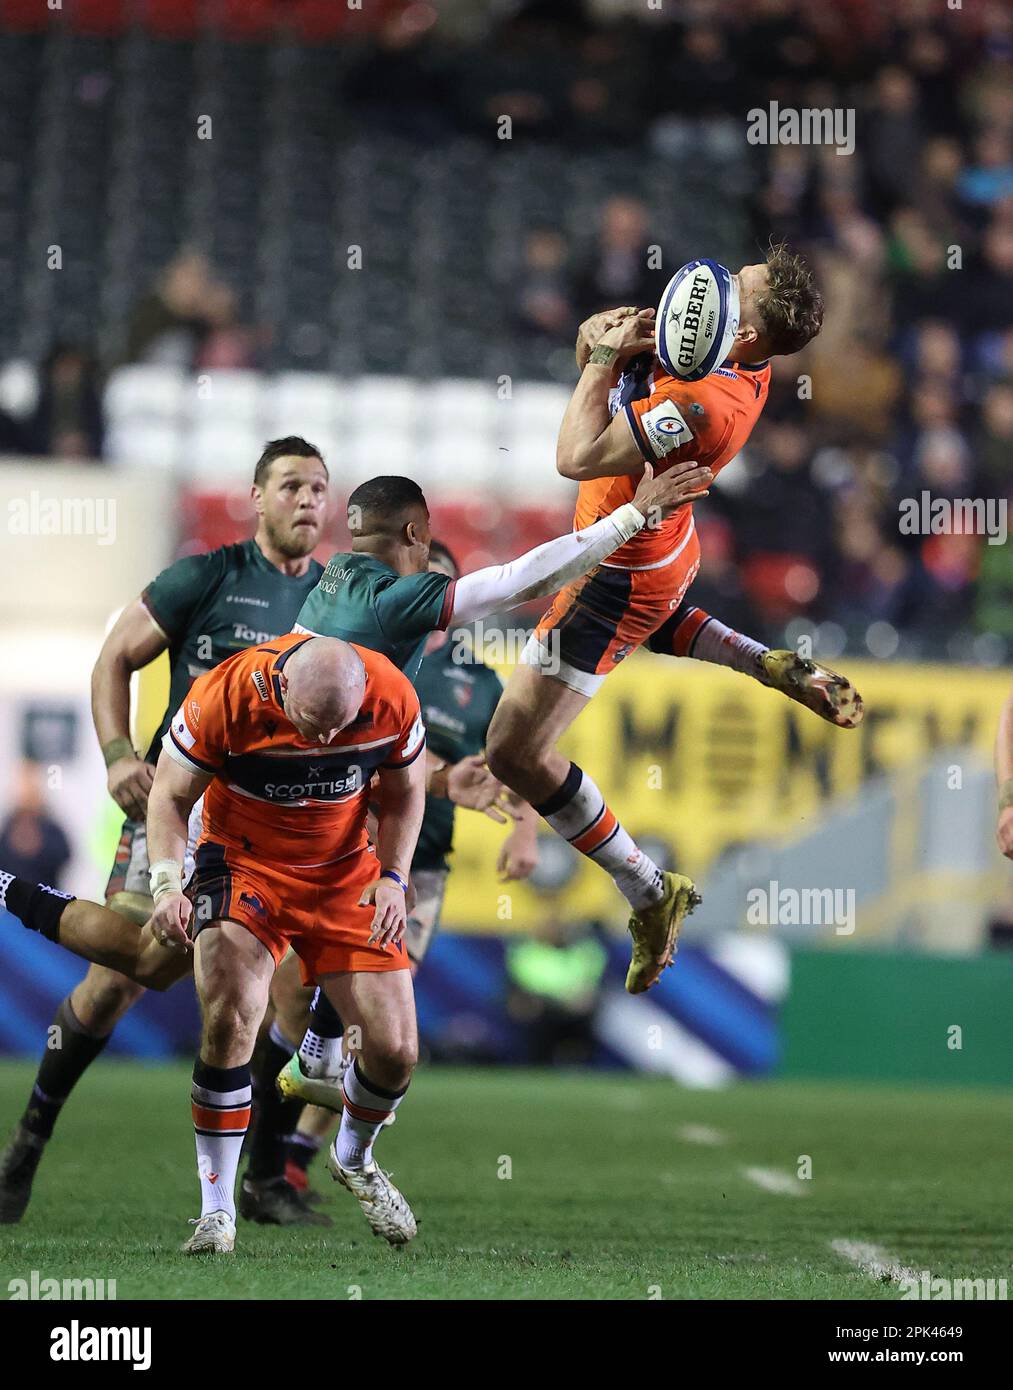 31.03.2022   Leicester, England. Rugby Union.                   EdinburghÕs Duhan van der Merwe fails to catch a high ball during the Heineken Champions Cup quarter final match played between Leicester Tigers and Edinburgh Rugby at the Mattioli Woods Welford Road Stadium, Leicester.  © Phil Hutchinson Stock Photo